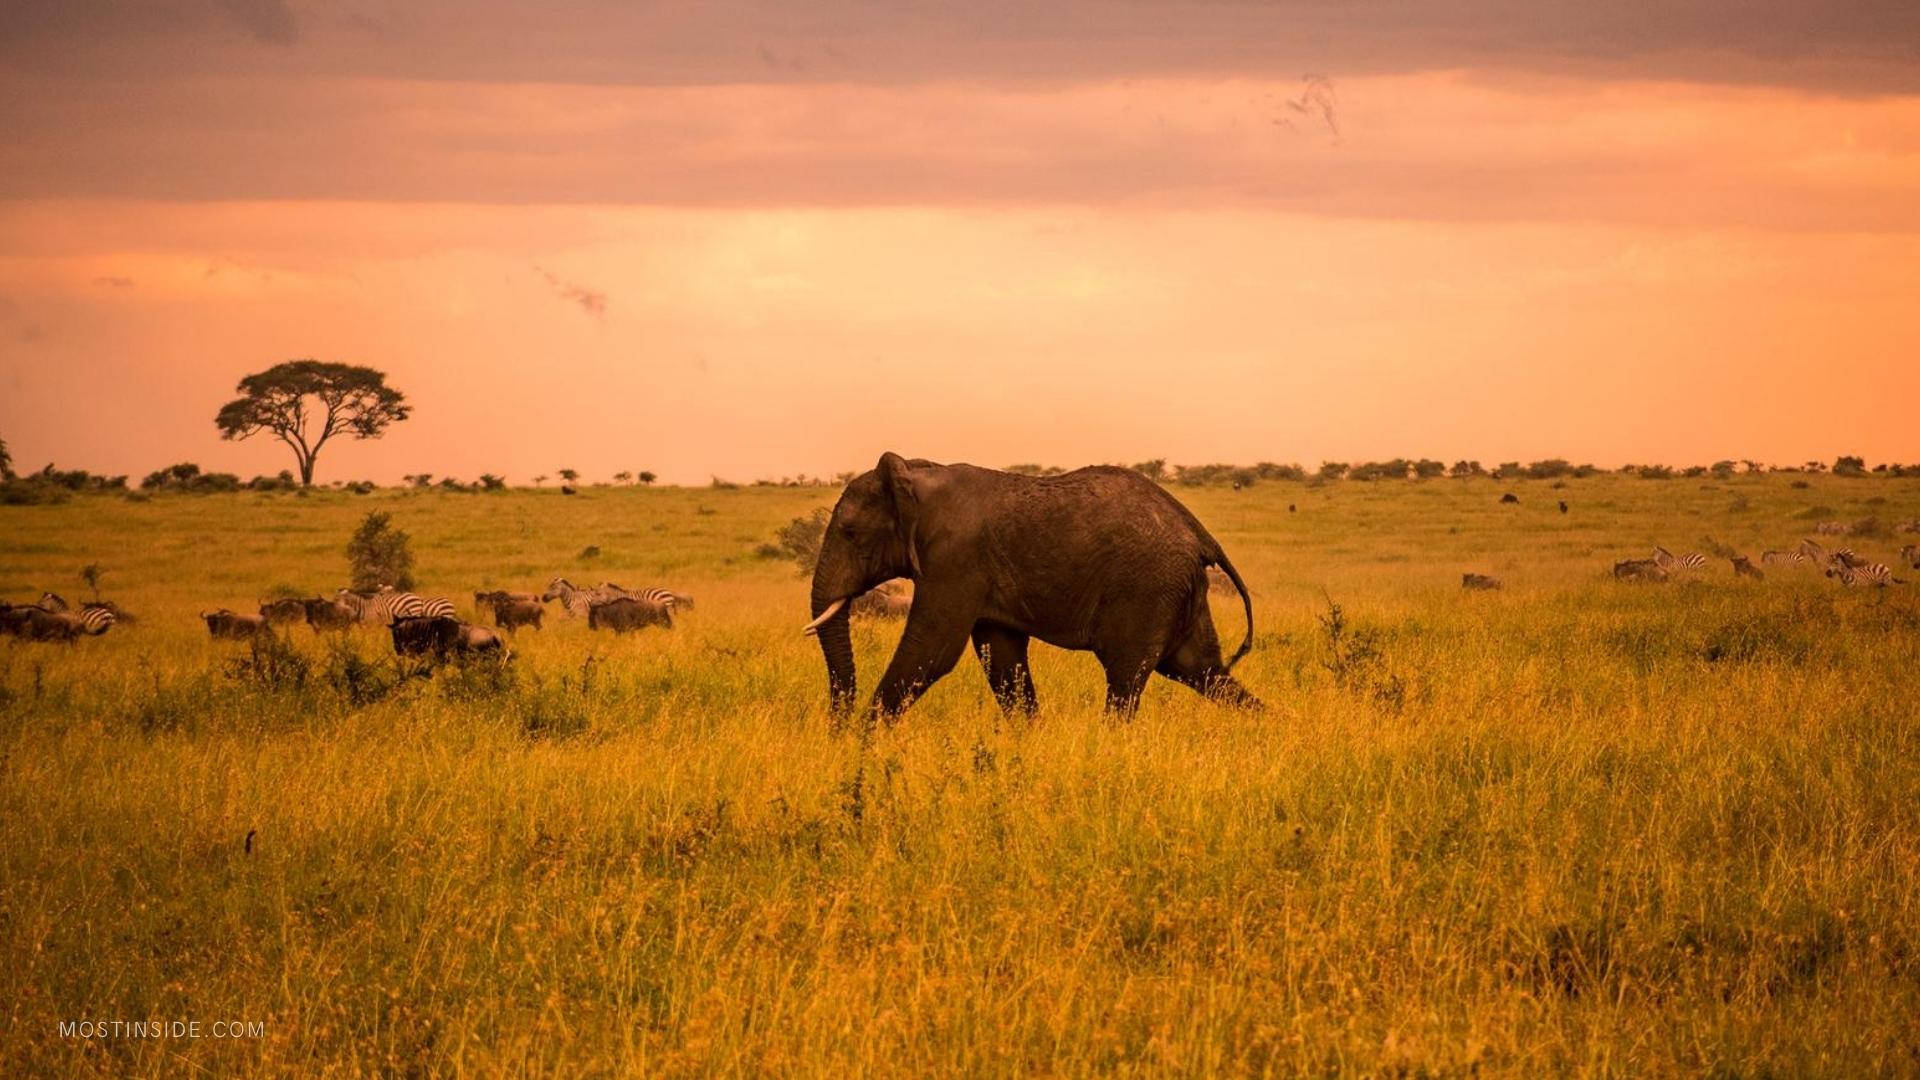 Romantic Places in Africa for a Safari Honeymoon